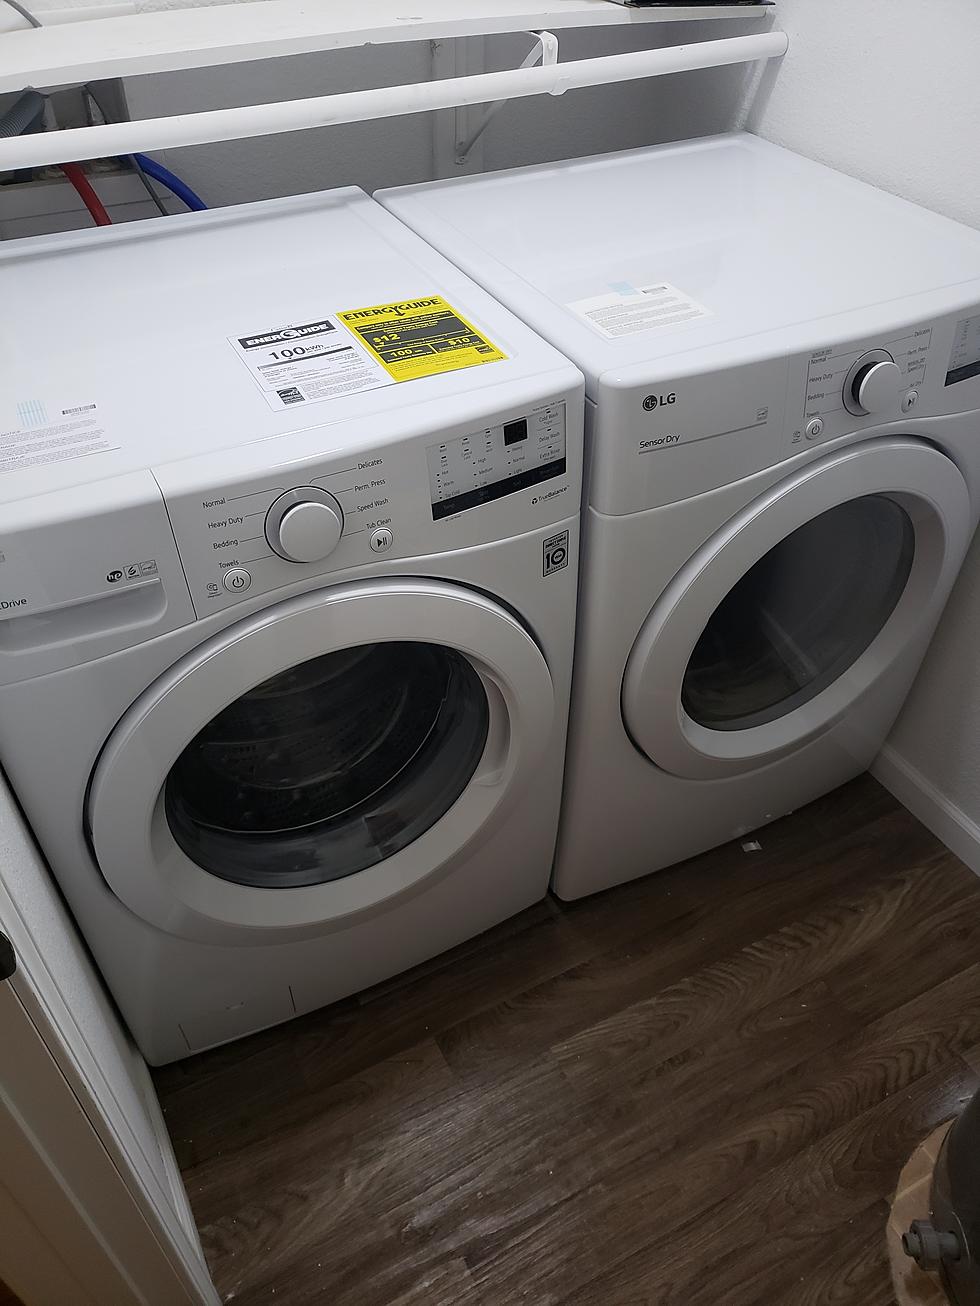 I Feel Like An Adult! I Bought A Washer/Dryer